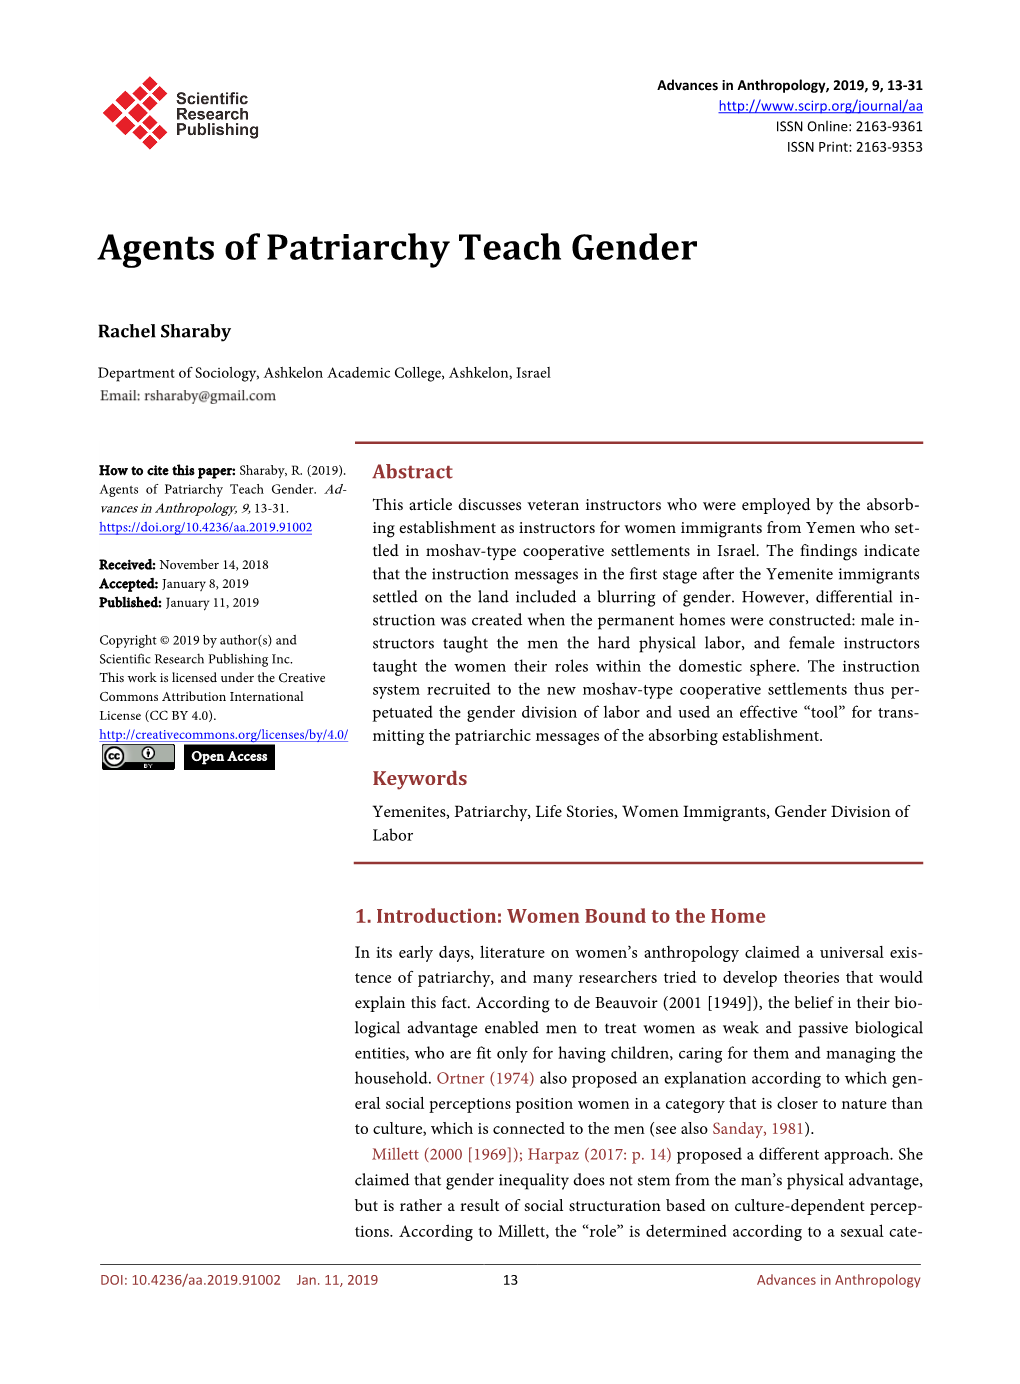 Agents of Patriarchy Teach Gender